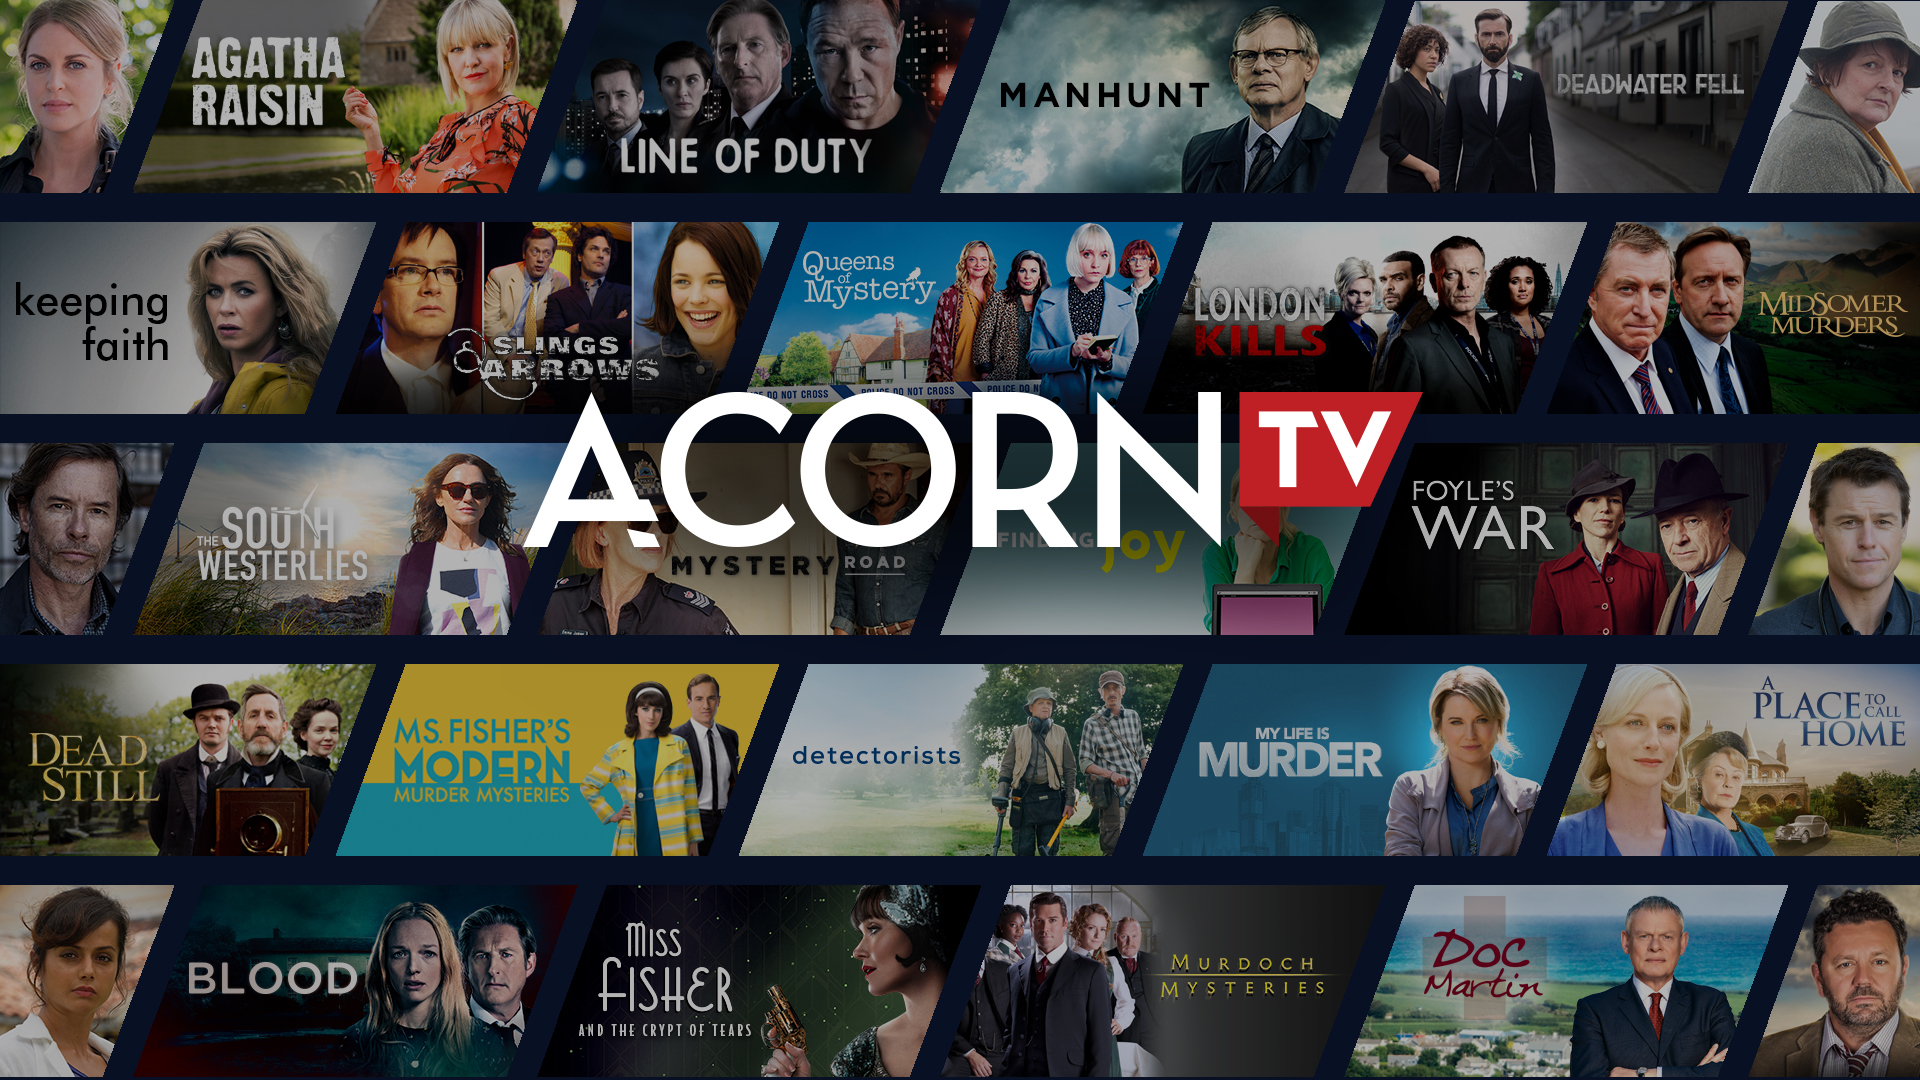 Gold Digger Premieres on Acorn TV May 4th - The Game of Nerds